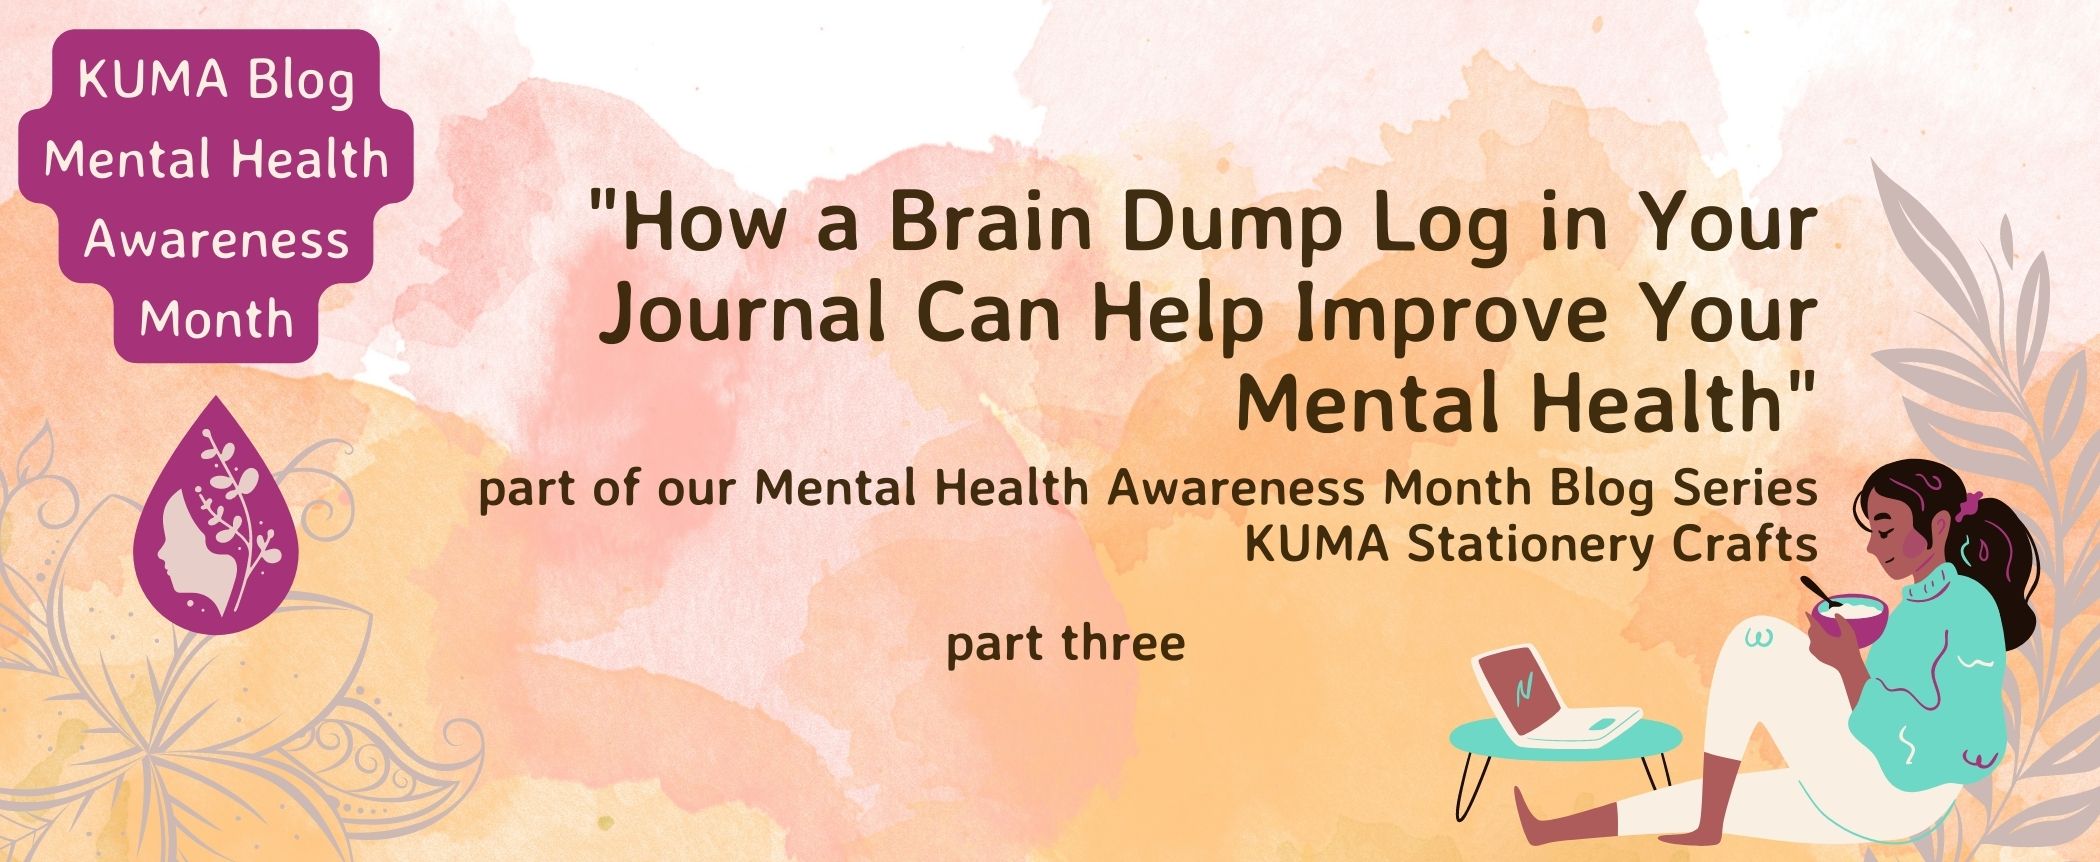 How a Brain Dump Log in Your Journal Can Help Improve Your Mental Health | KUMA Stationery Crafts